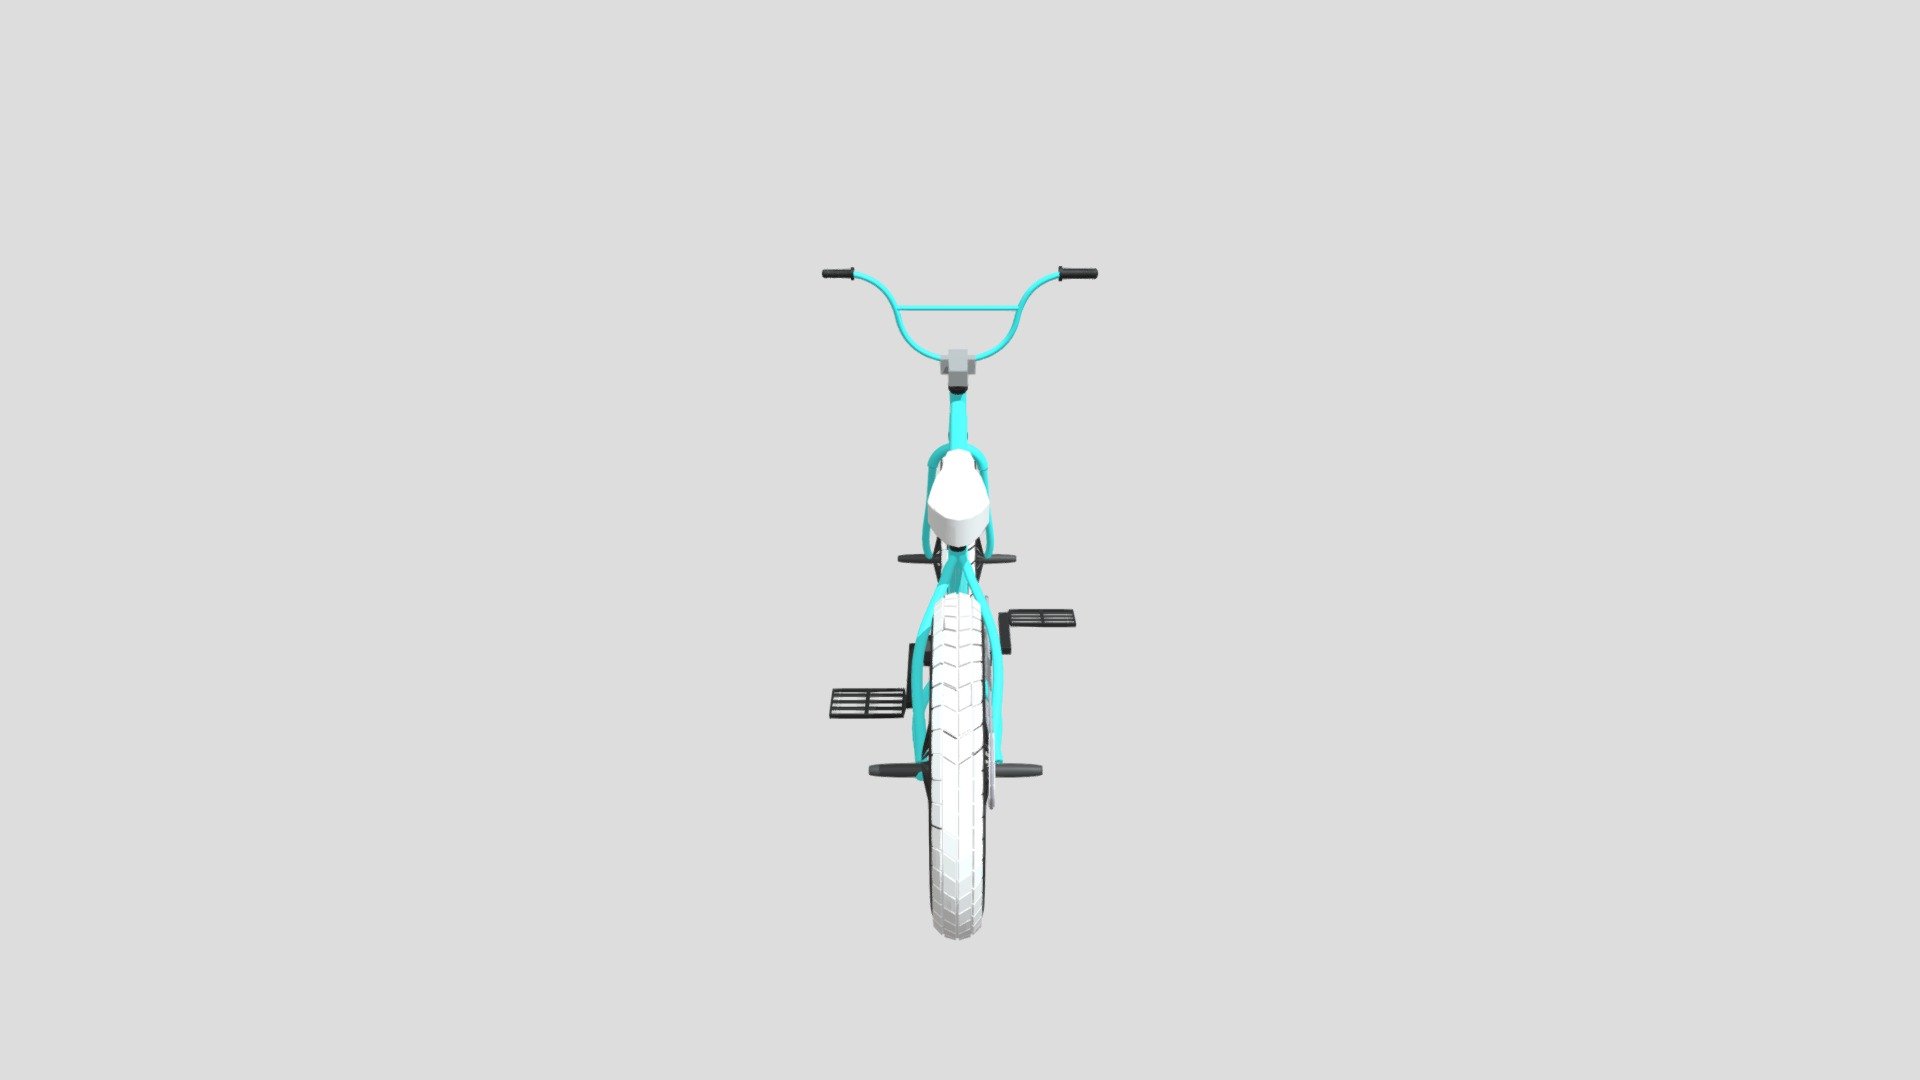 BMX bike made with blender 
texture painted in  blender
just for a bit of fun 3d model